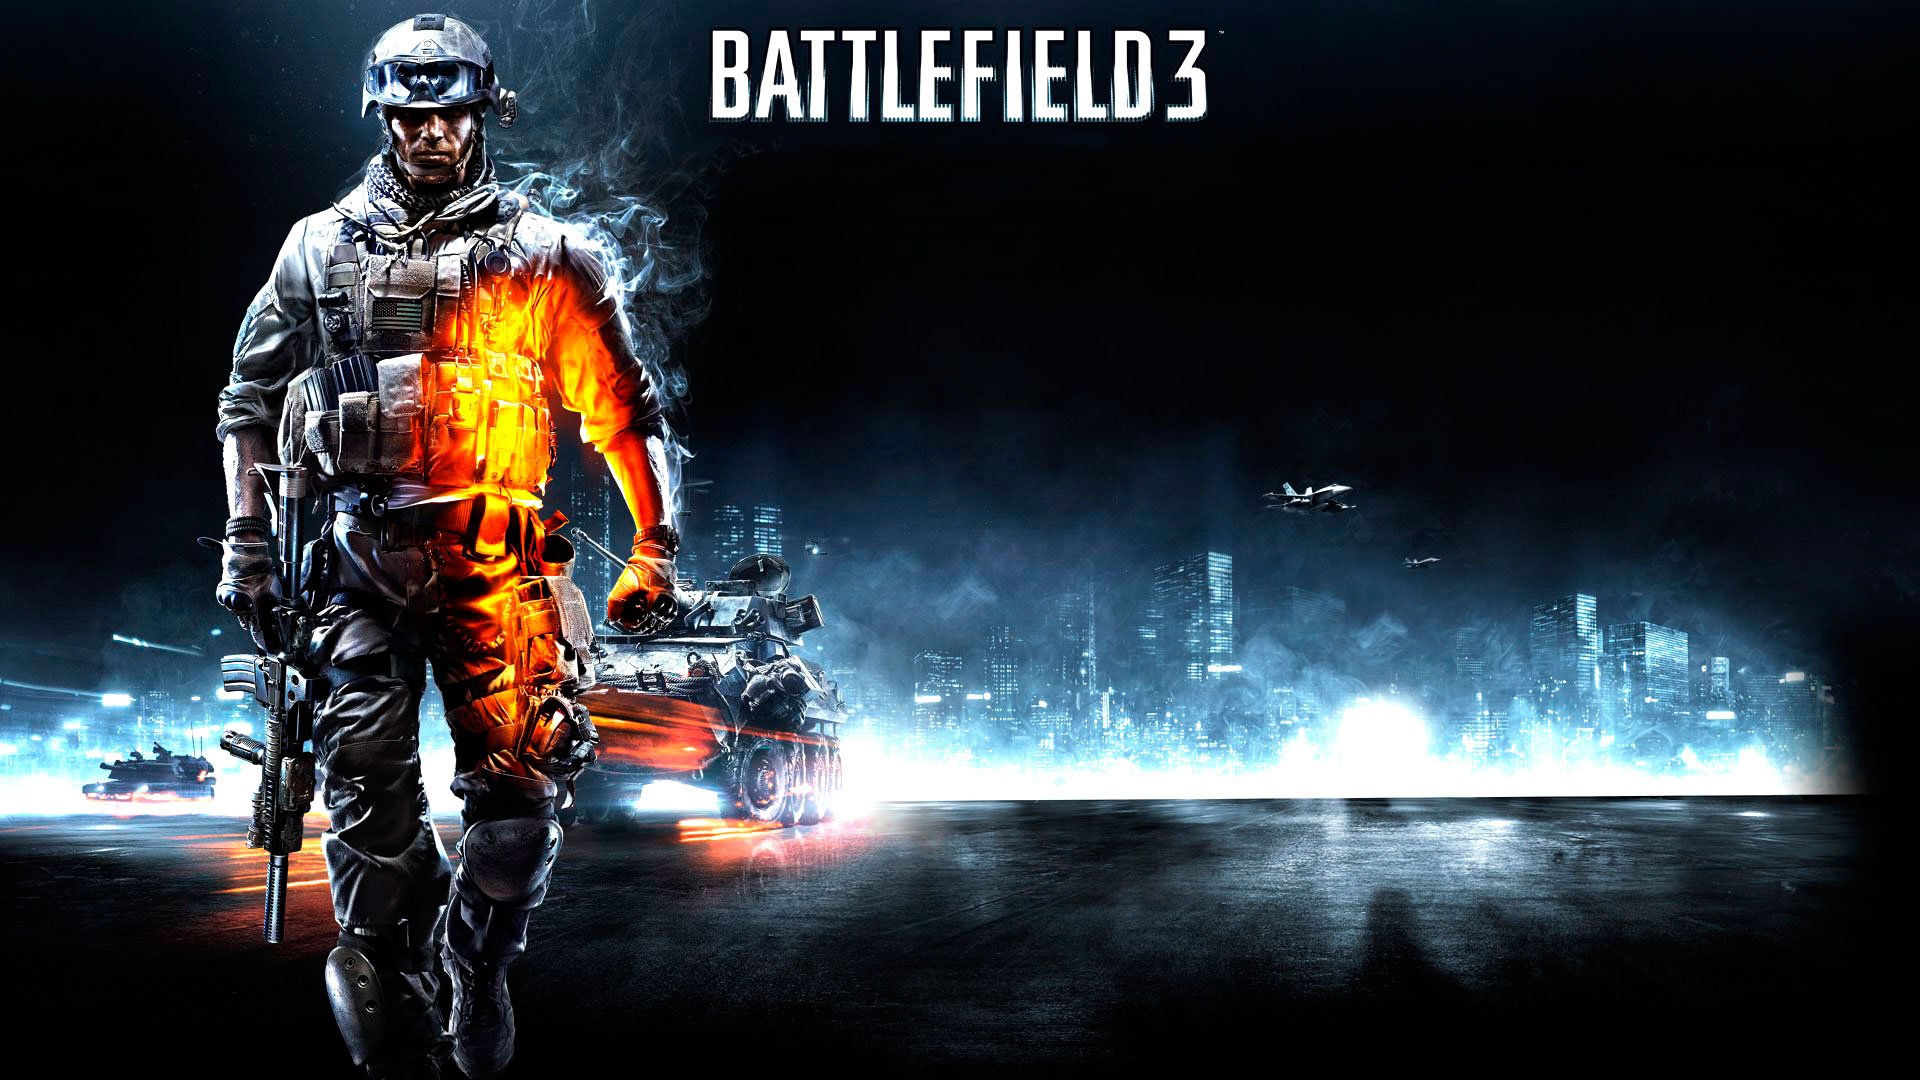 Battlefield 3 Wallpapers in HD High Resolution Page 5 1920x1080